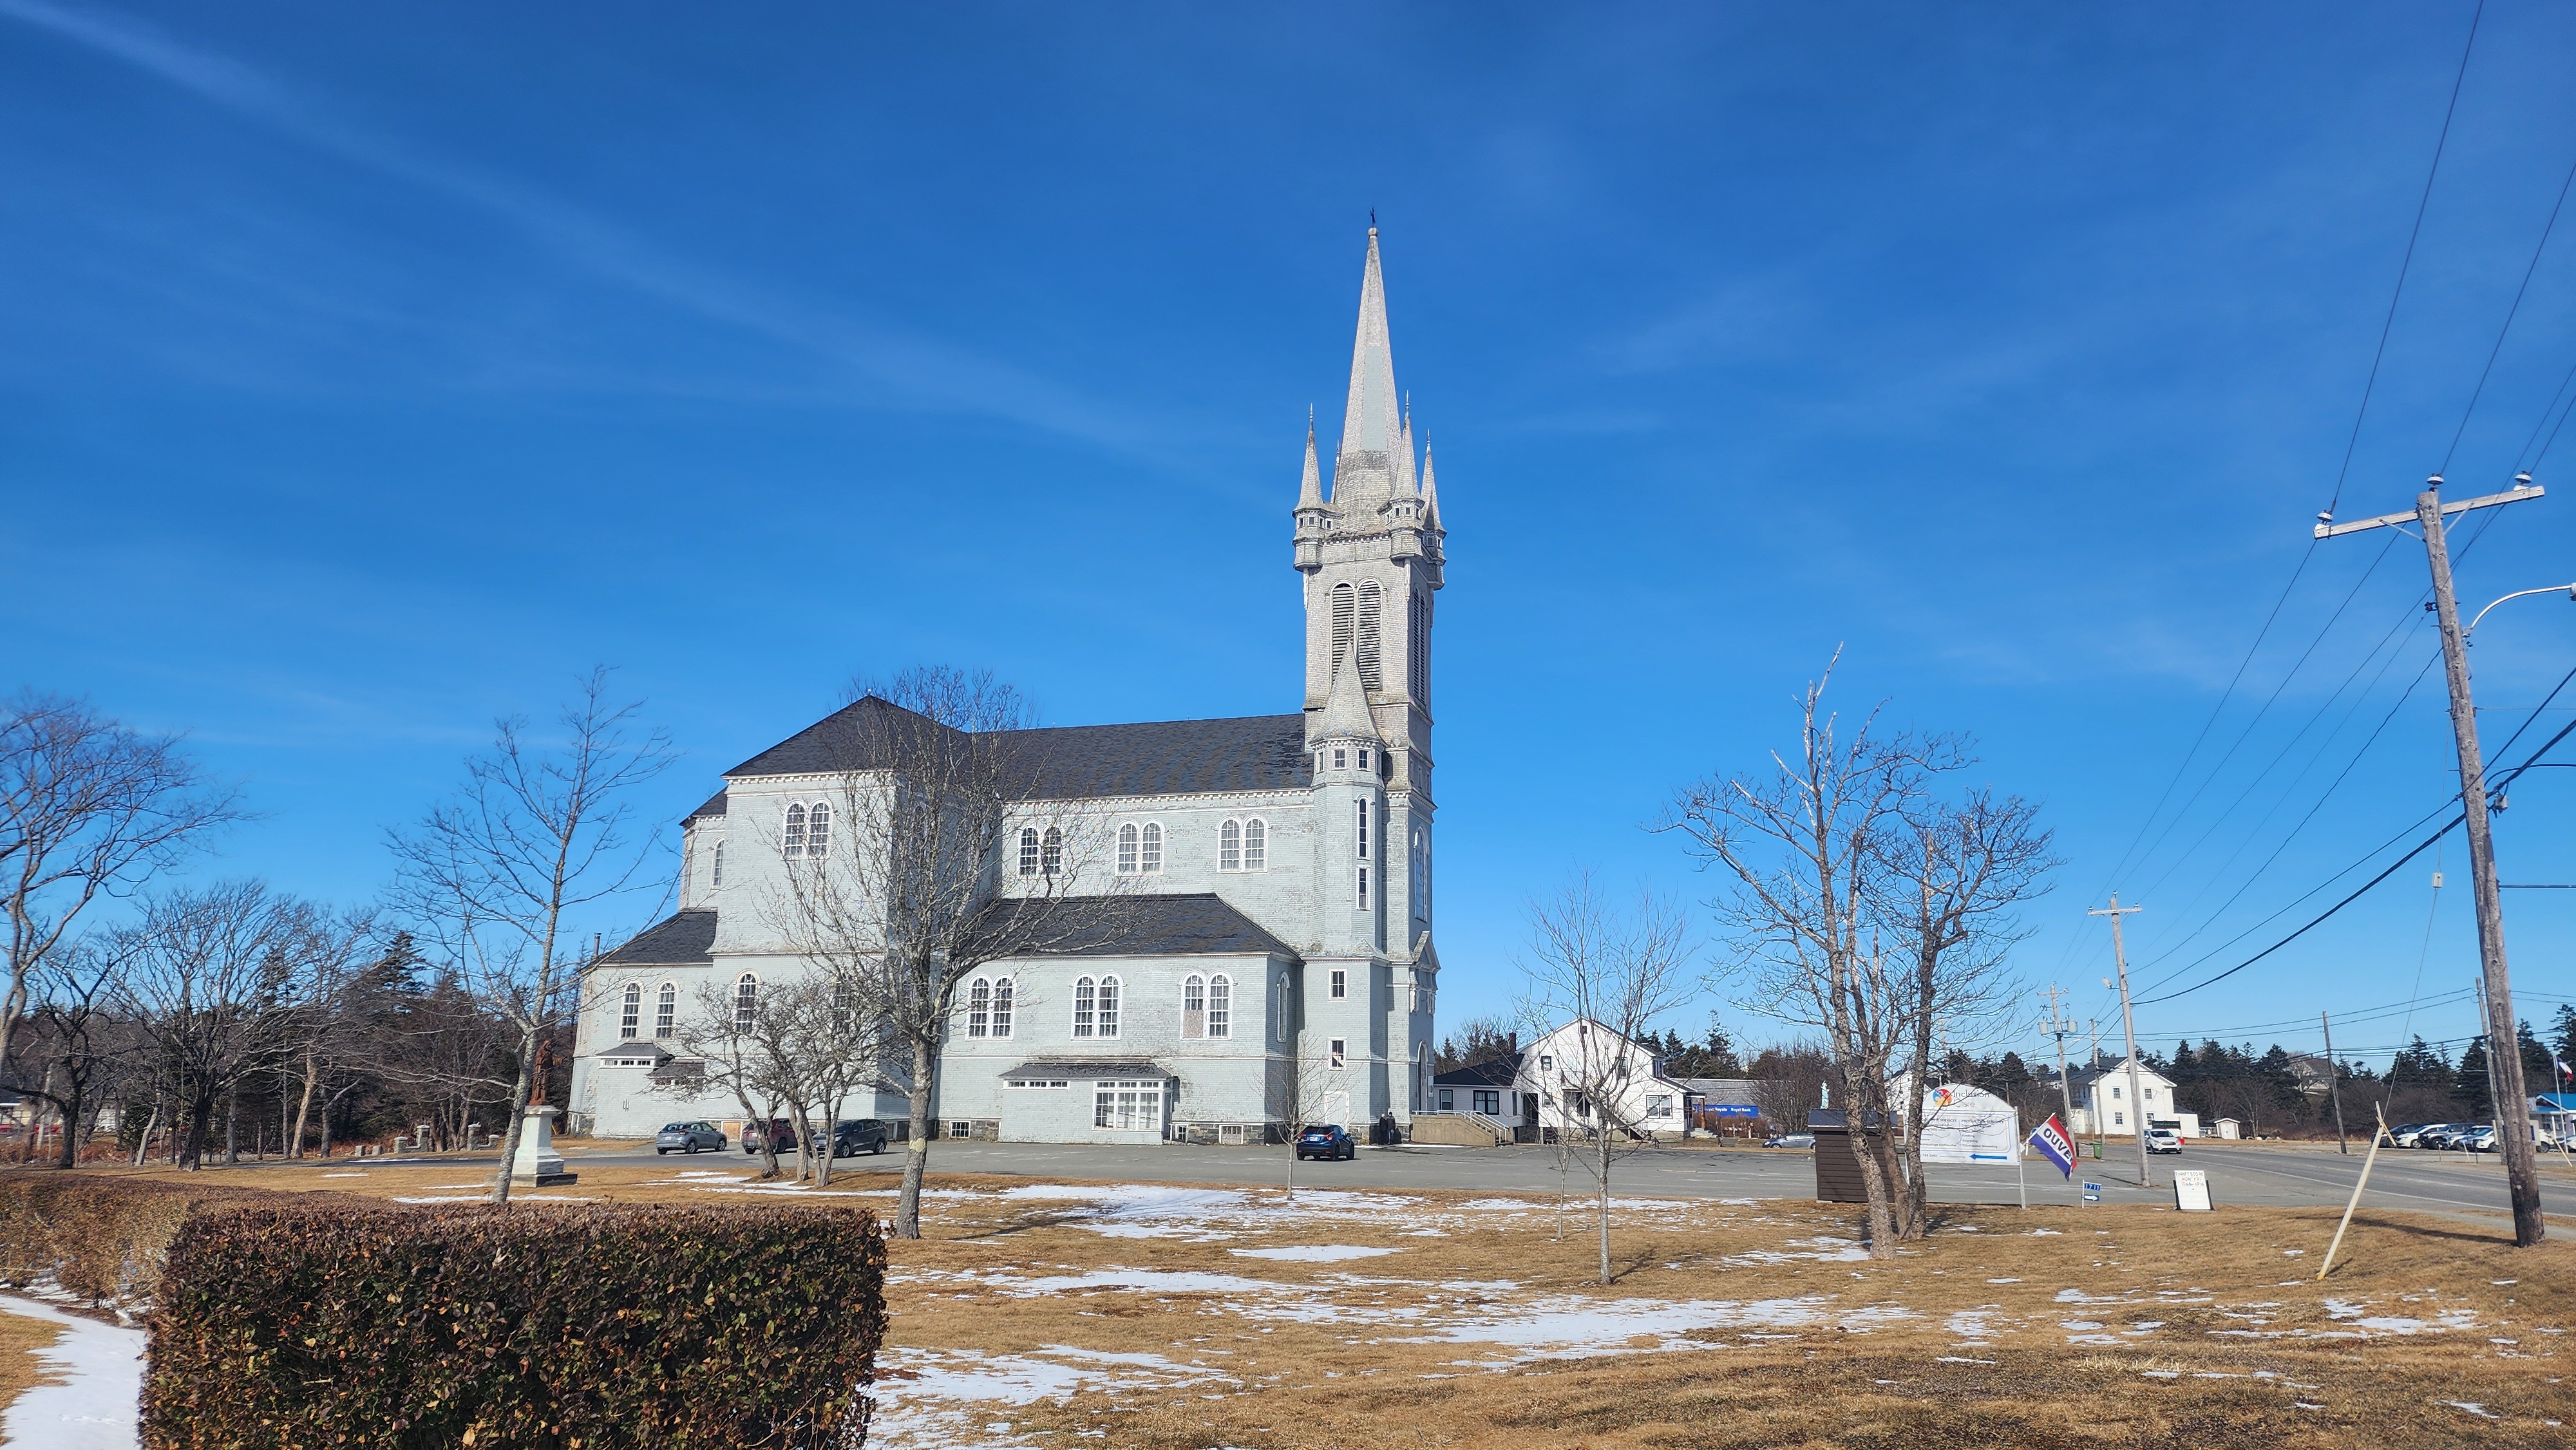 ‘Hope gets dimmer as time goes’: Historic Acadian N.S. church up for sale for $250K